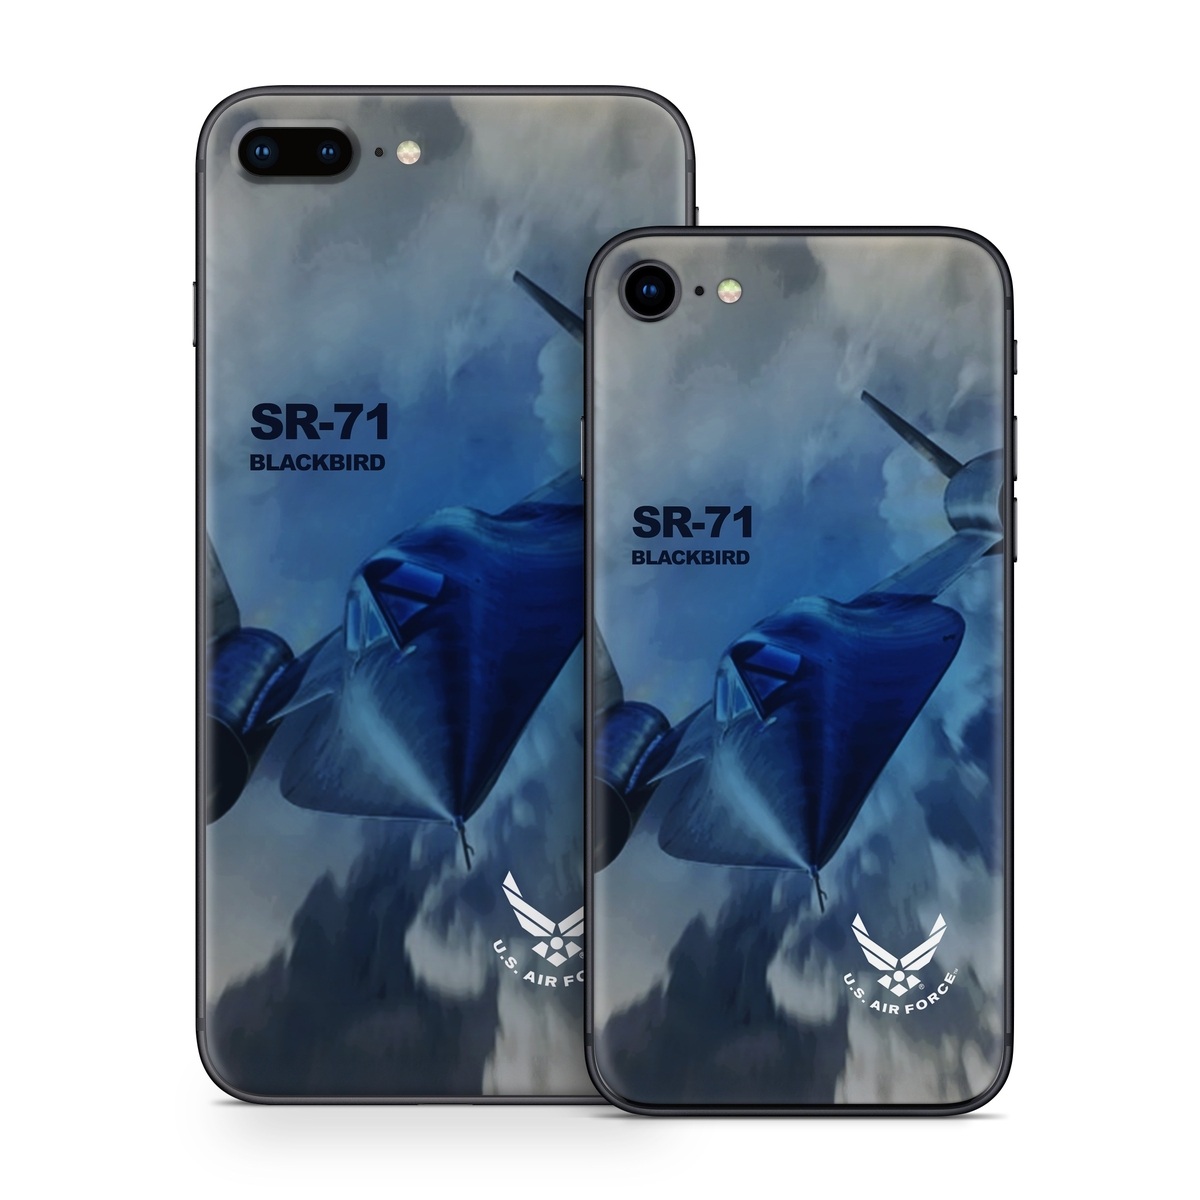 iPhone 8 Series Skin design of Airplane, Propeller, Aircraft, Sky, Vehicle, Aerospace engineering, Experimental aircraft, Military aircraft, Aviation, with black, blue, gray colors